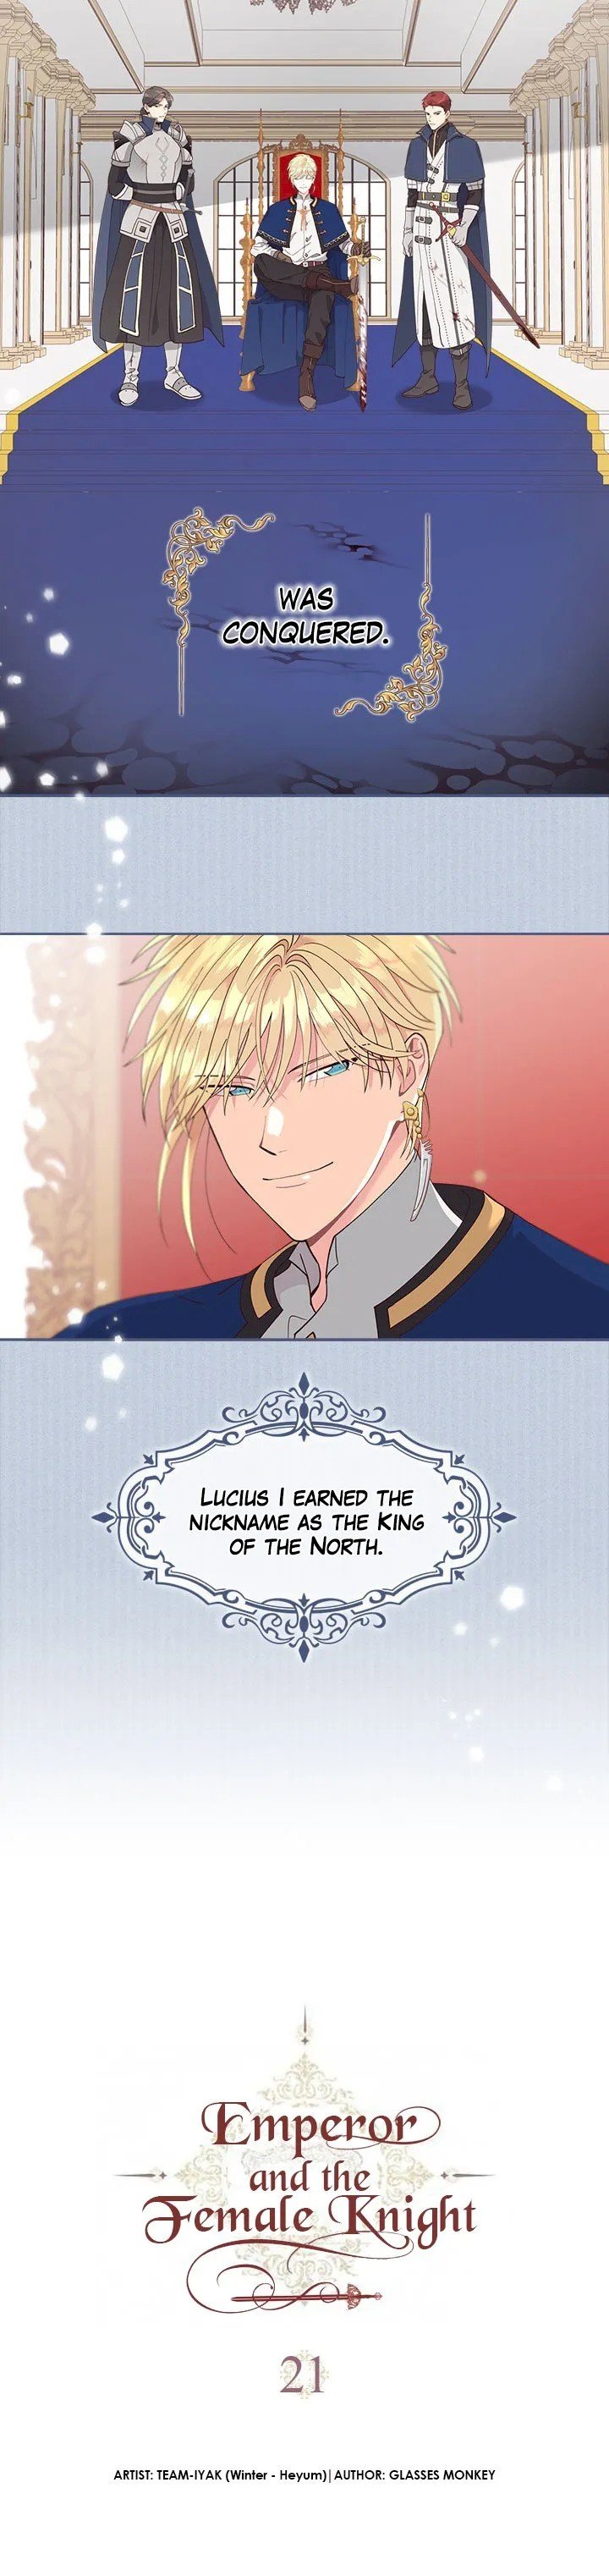 emperor-and-the-female-knight-chap-21-2